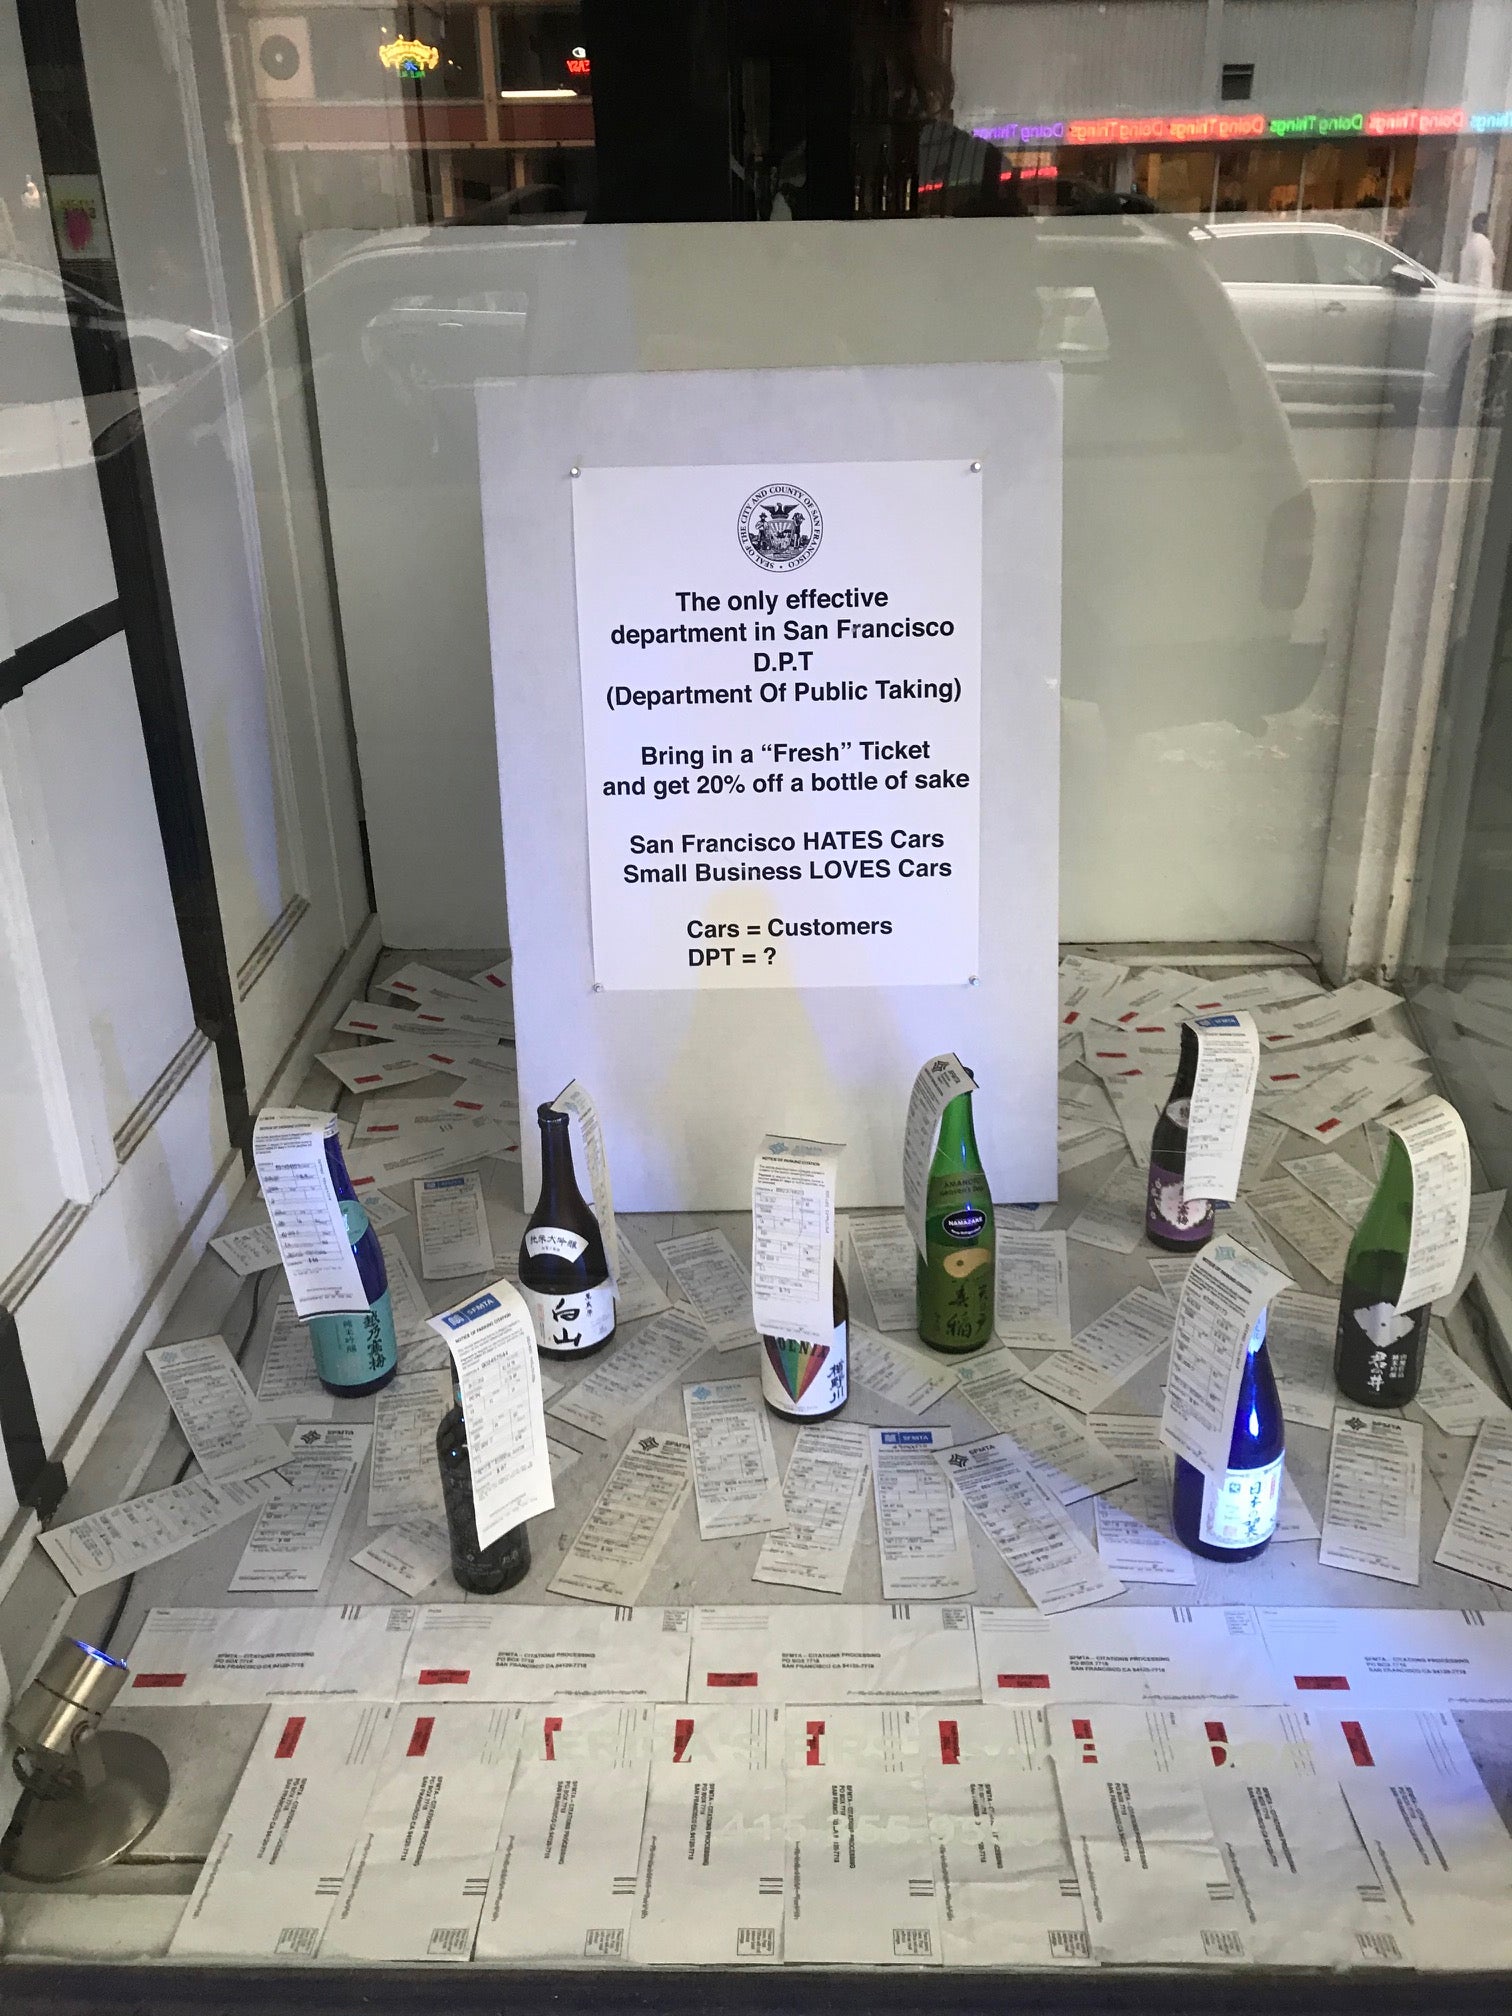 “Ask Beau” – “Did we hear about True Sake in the news for your window display?”